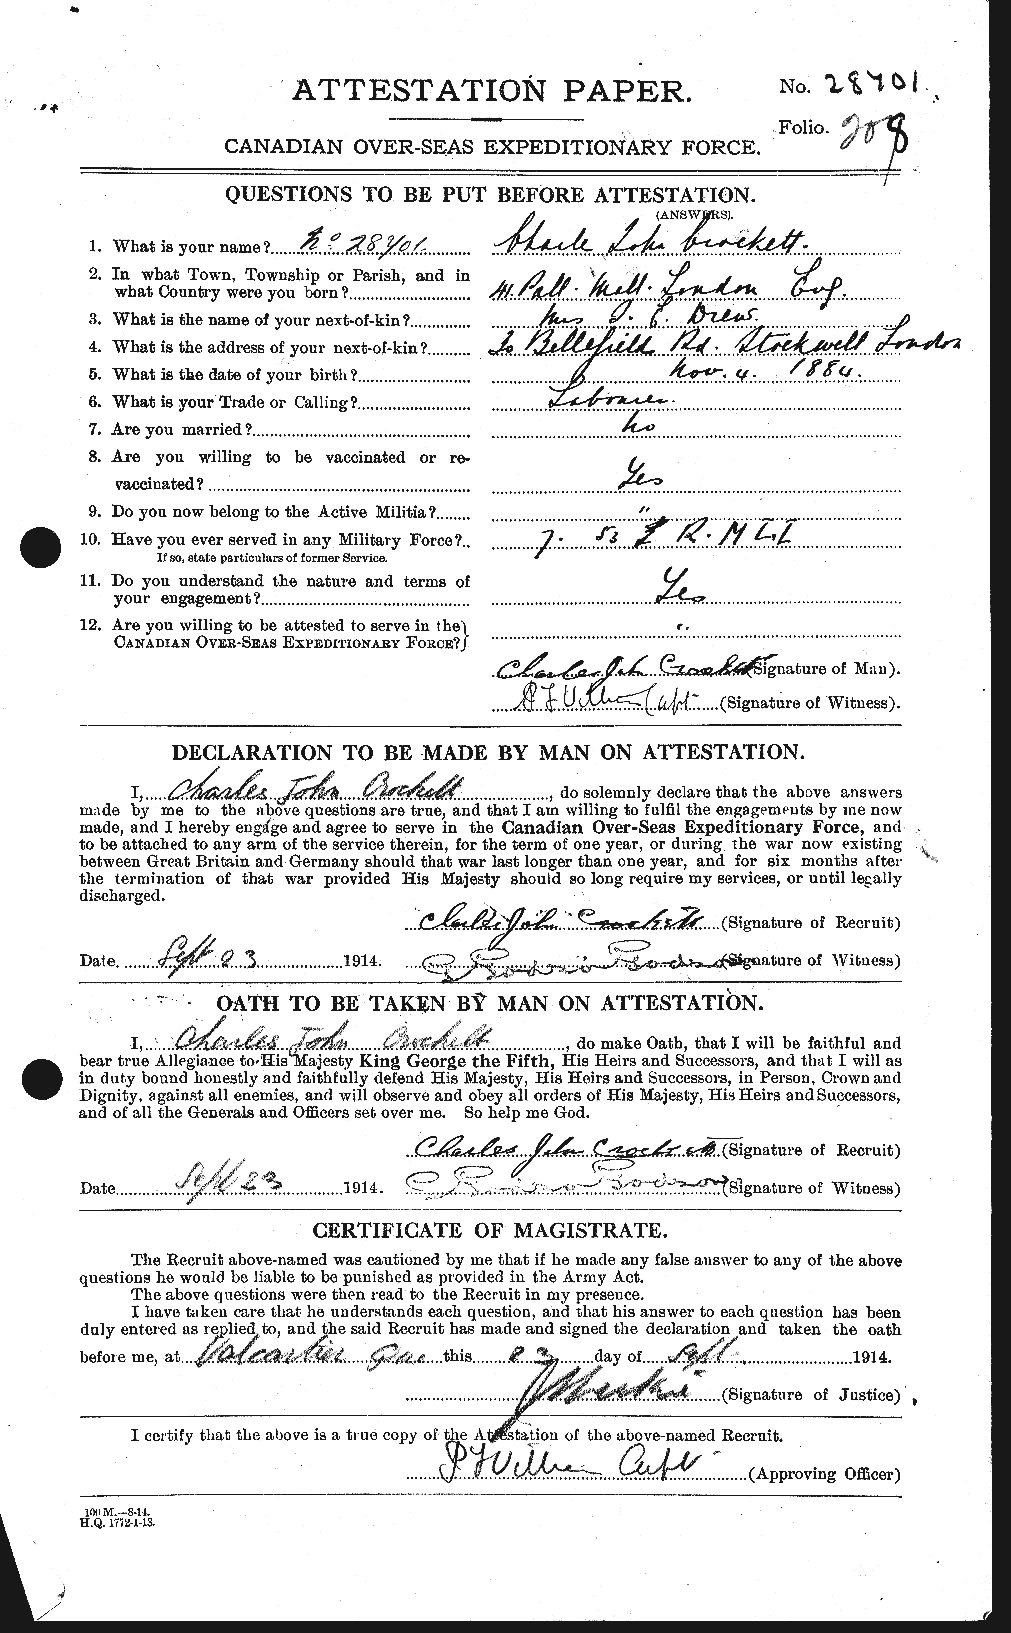 Personnel Records of the First World War - CEF 064721a